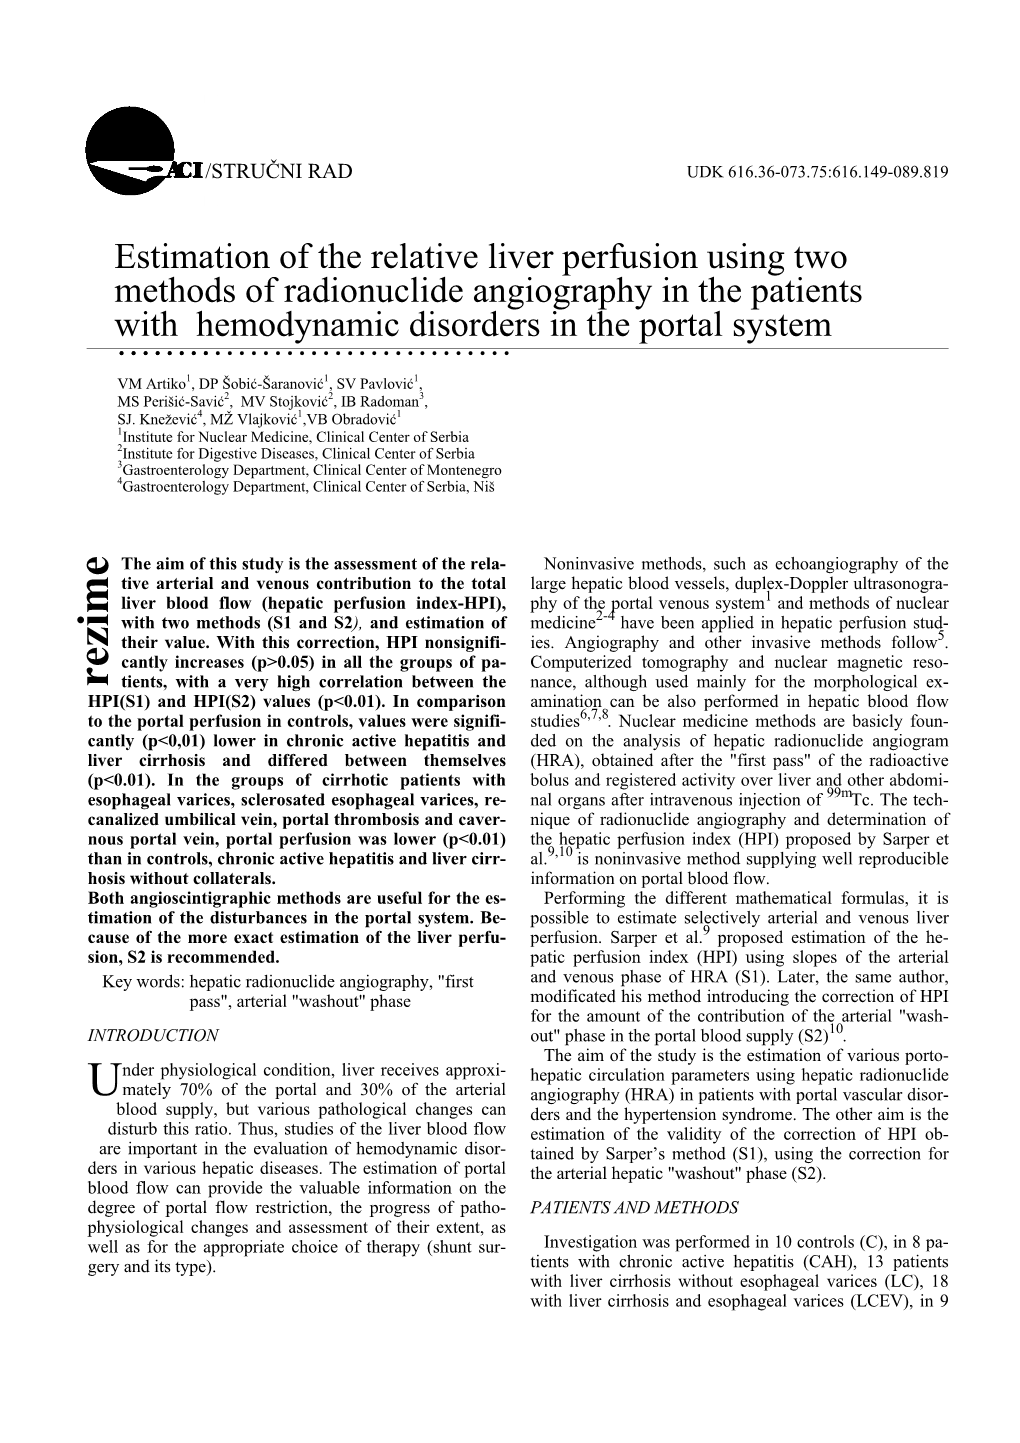 Estimation of the Relative Liver Perfusion Using Two Methods of Radionuclide Angiography in the Patients With